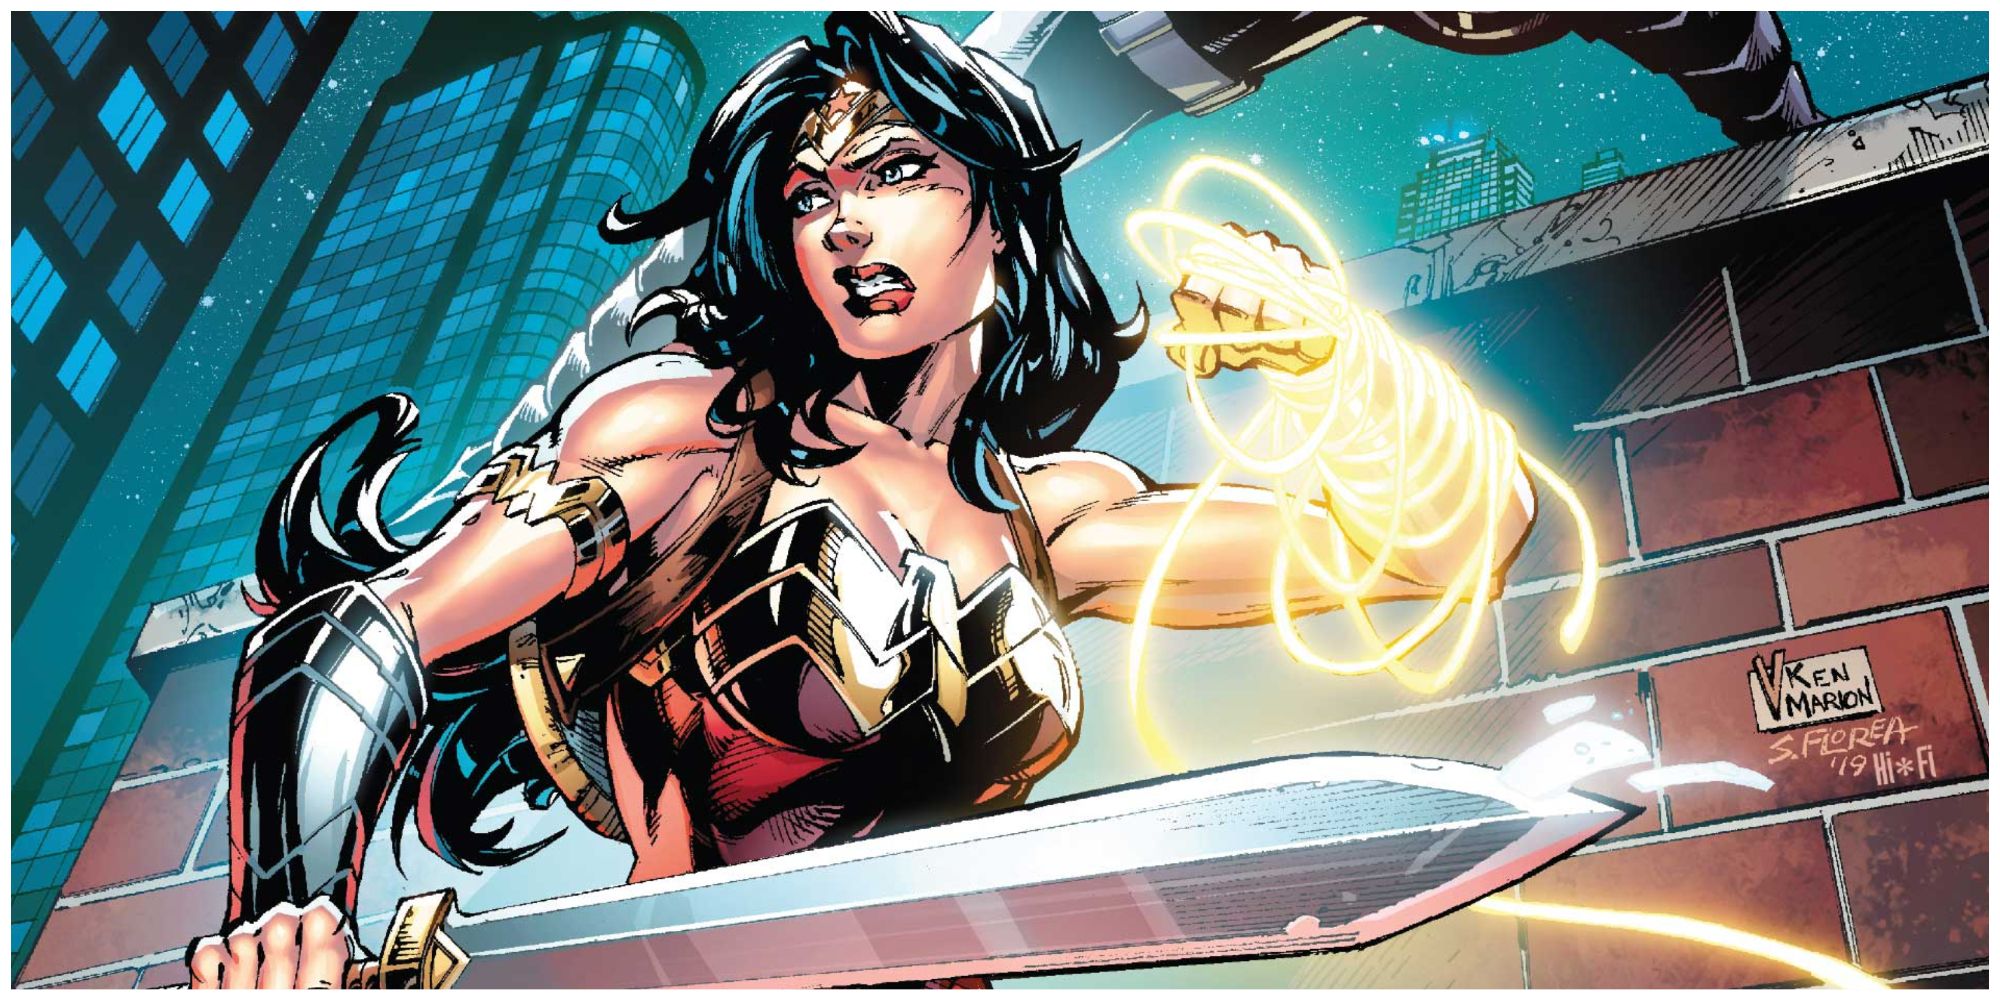 Wonder Woman stands her ground, looking for a hidden opponent